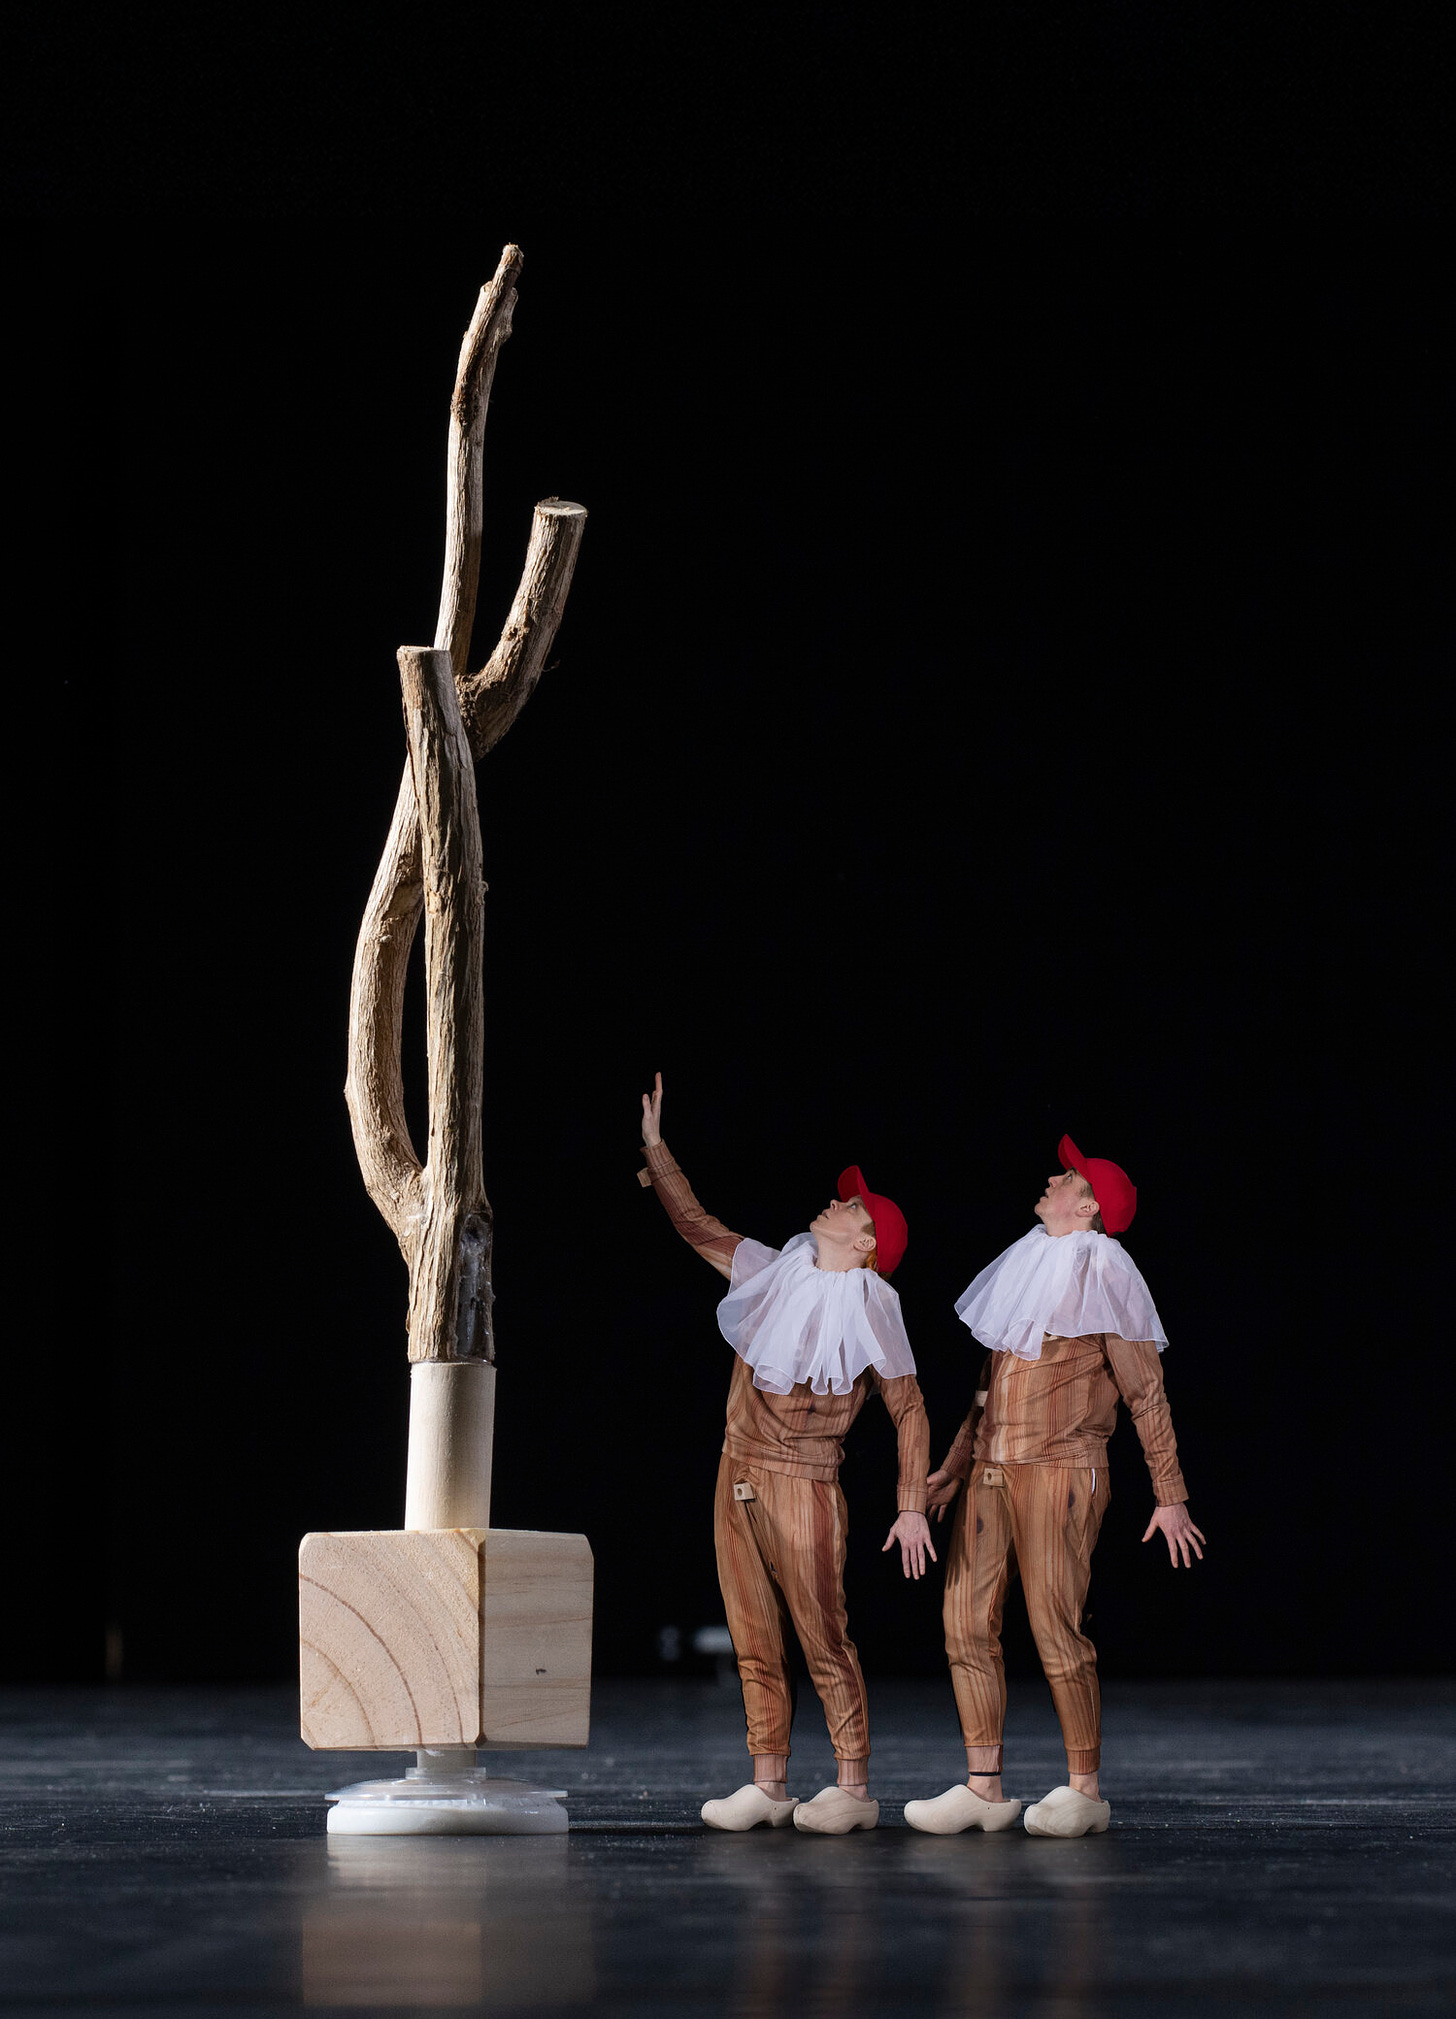  Artists Cade &amp; MacAskill are wearing wood patterned leisure suits with white clown-like ruffs and red baseball caps. They are looking up at a giant twig which looks like a tree because of forced perspective in the photo.  